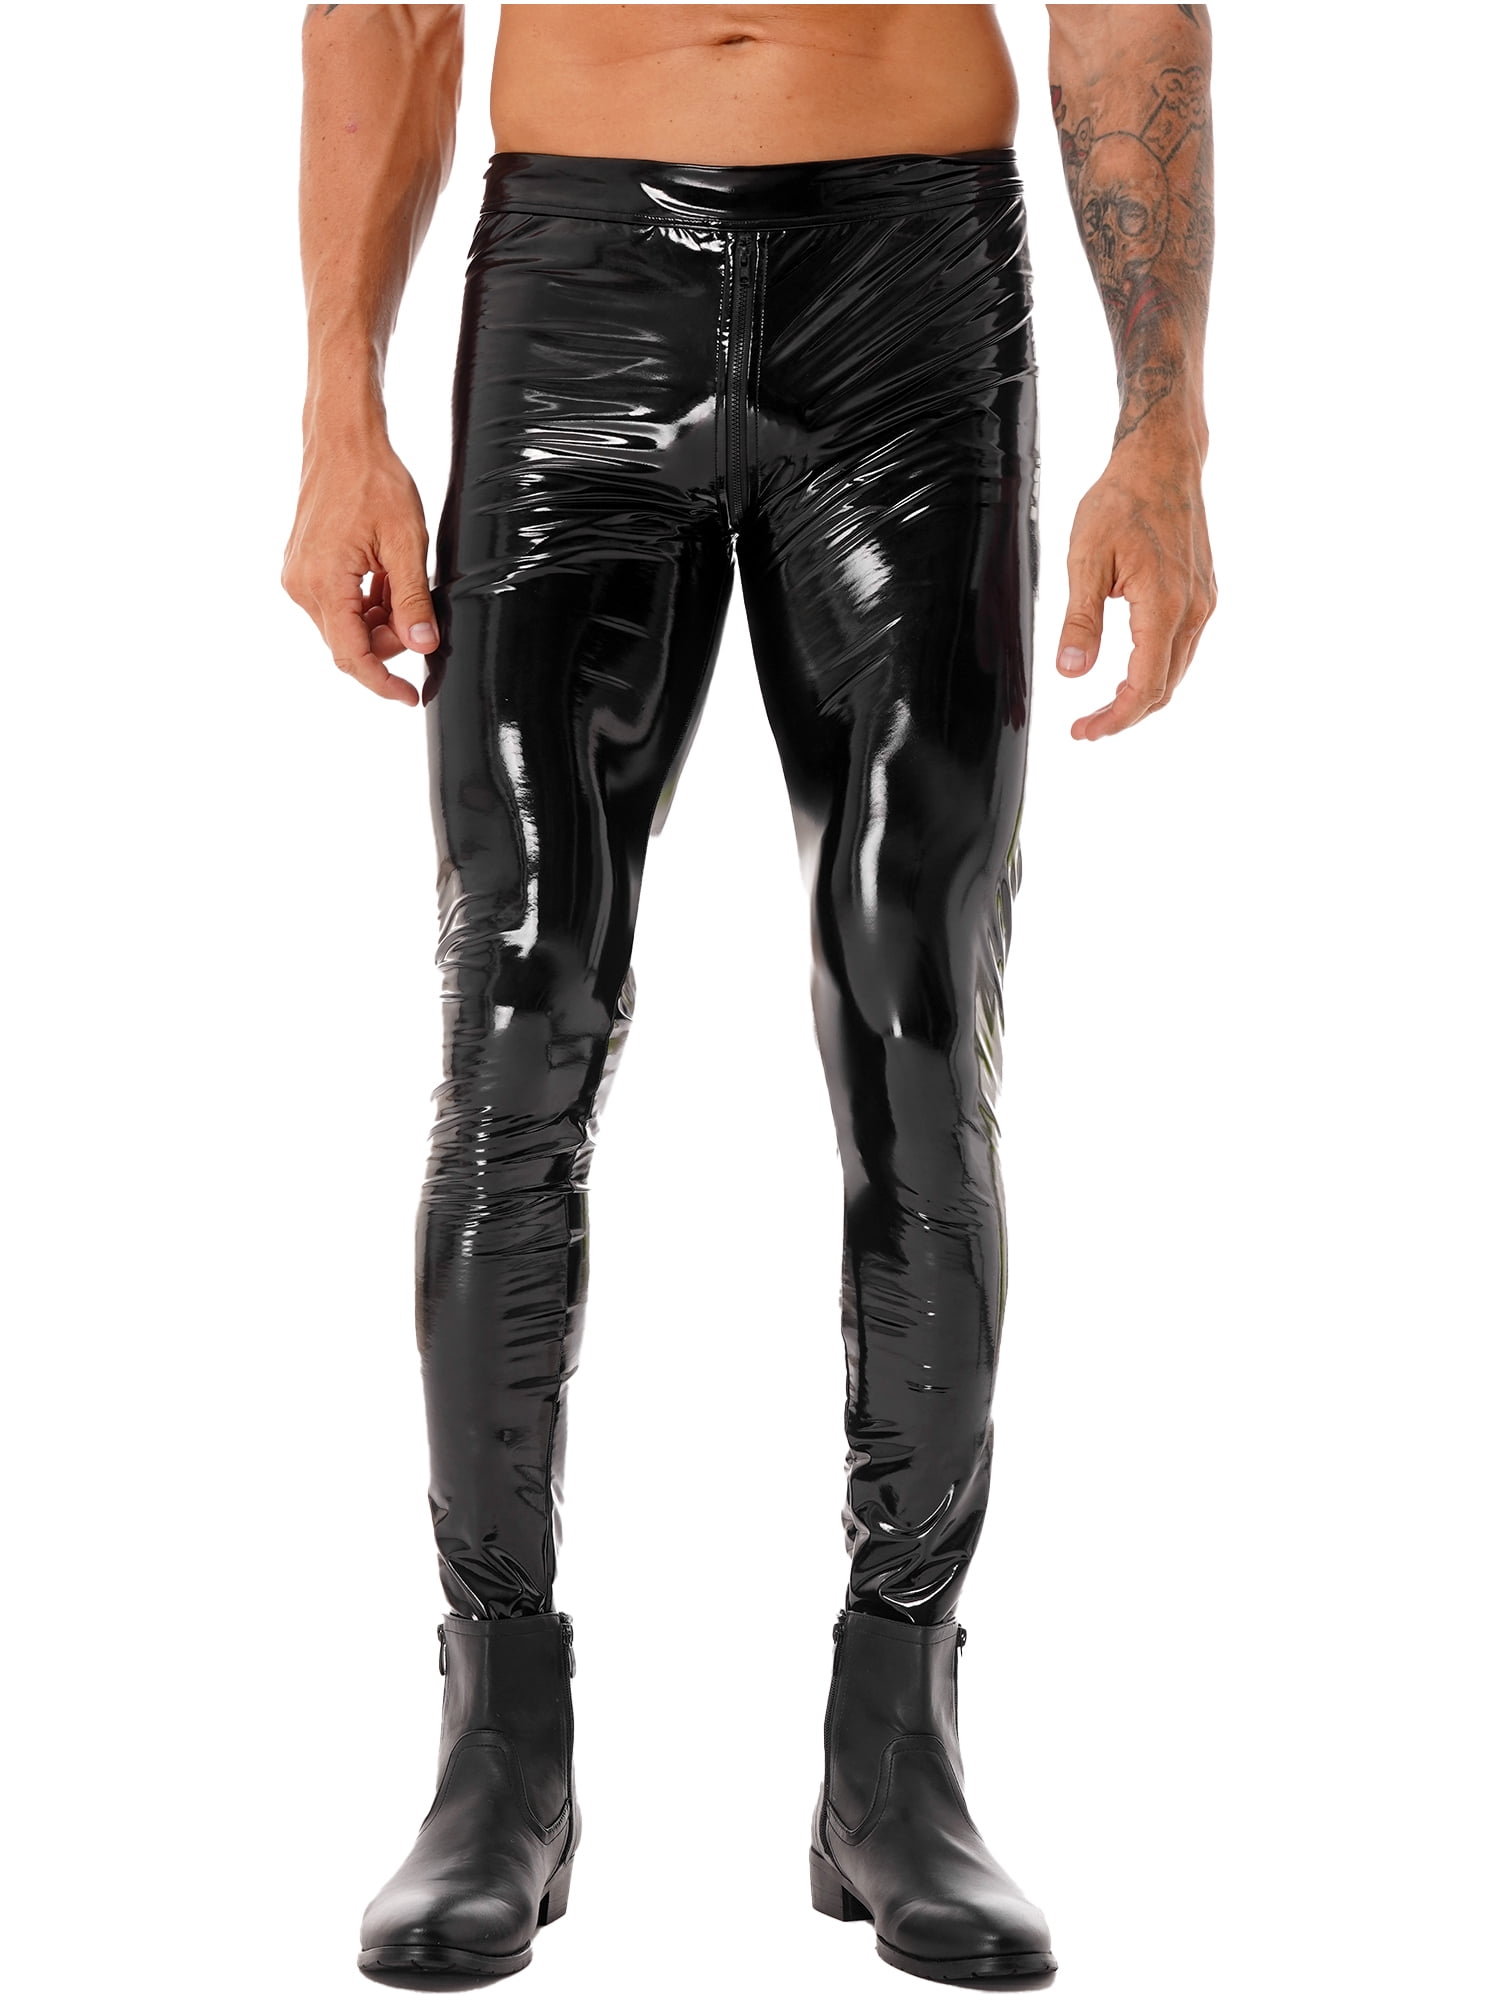 iEFiEL Mens Faux Leather Pants Shiny Low Waist Tight Trousers for Club Stage Show Rock Band Performance 7f03bf09 cd2c 46a0 9189 a47d9e5c74bf.6ceb12725426f9a4619f629af1df6ba3